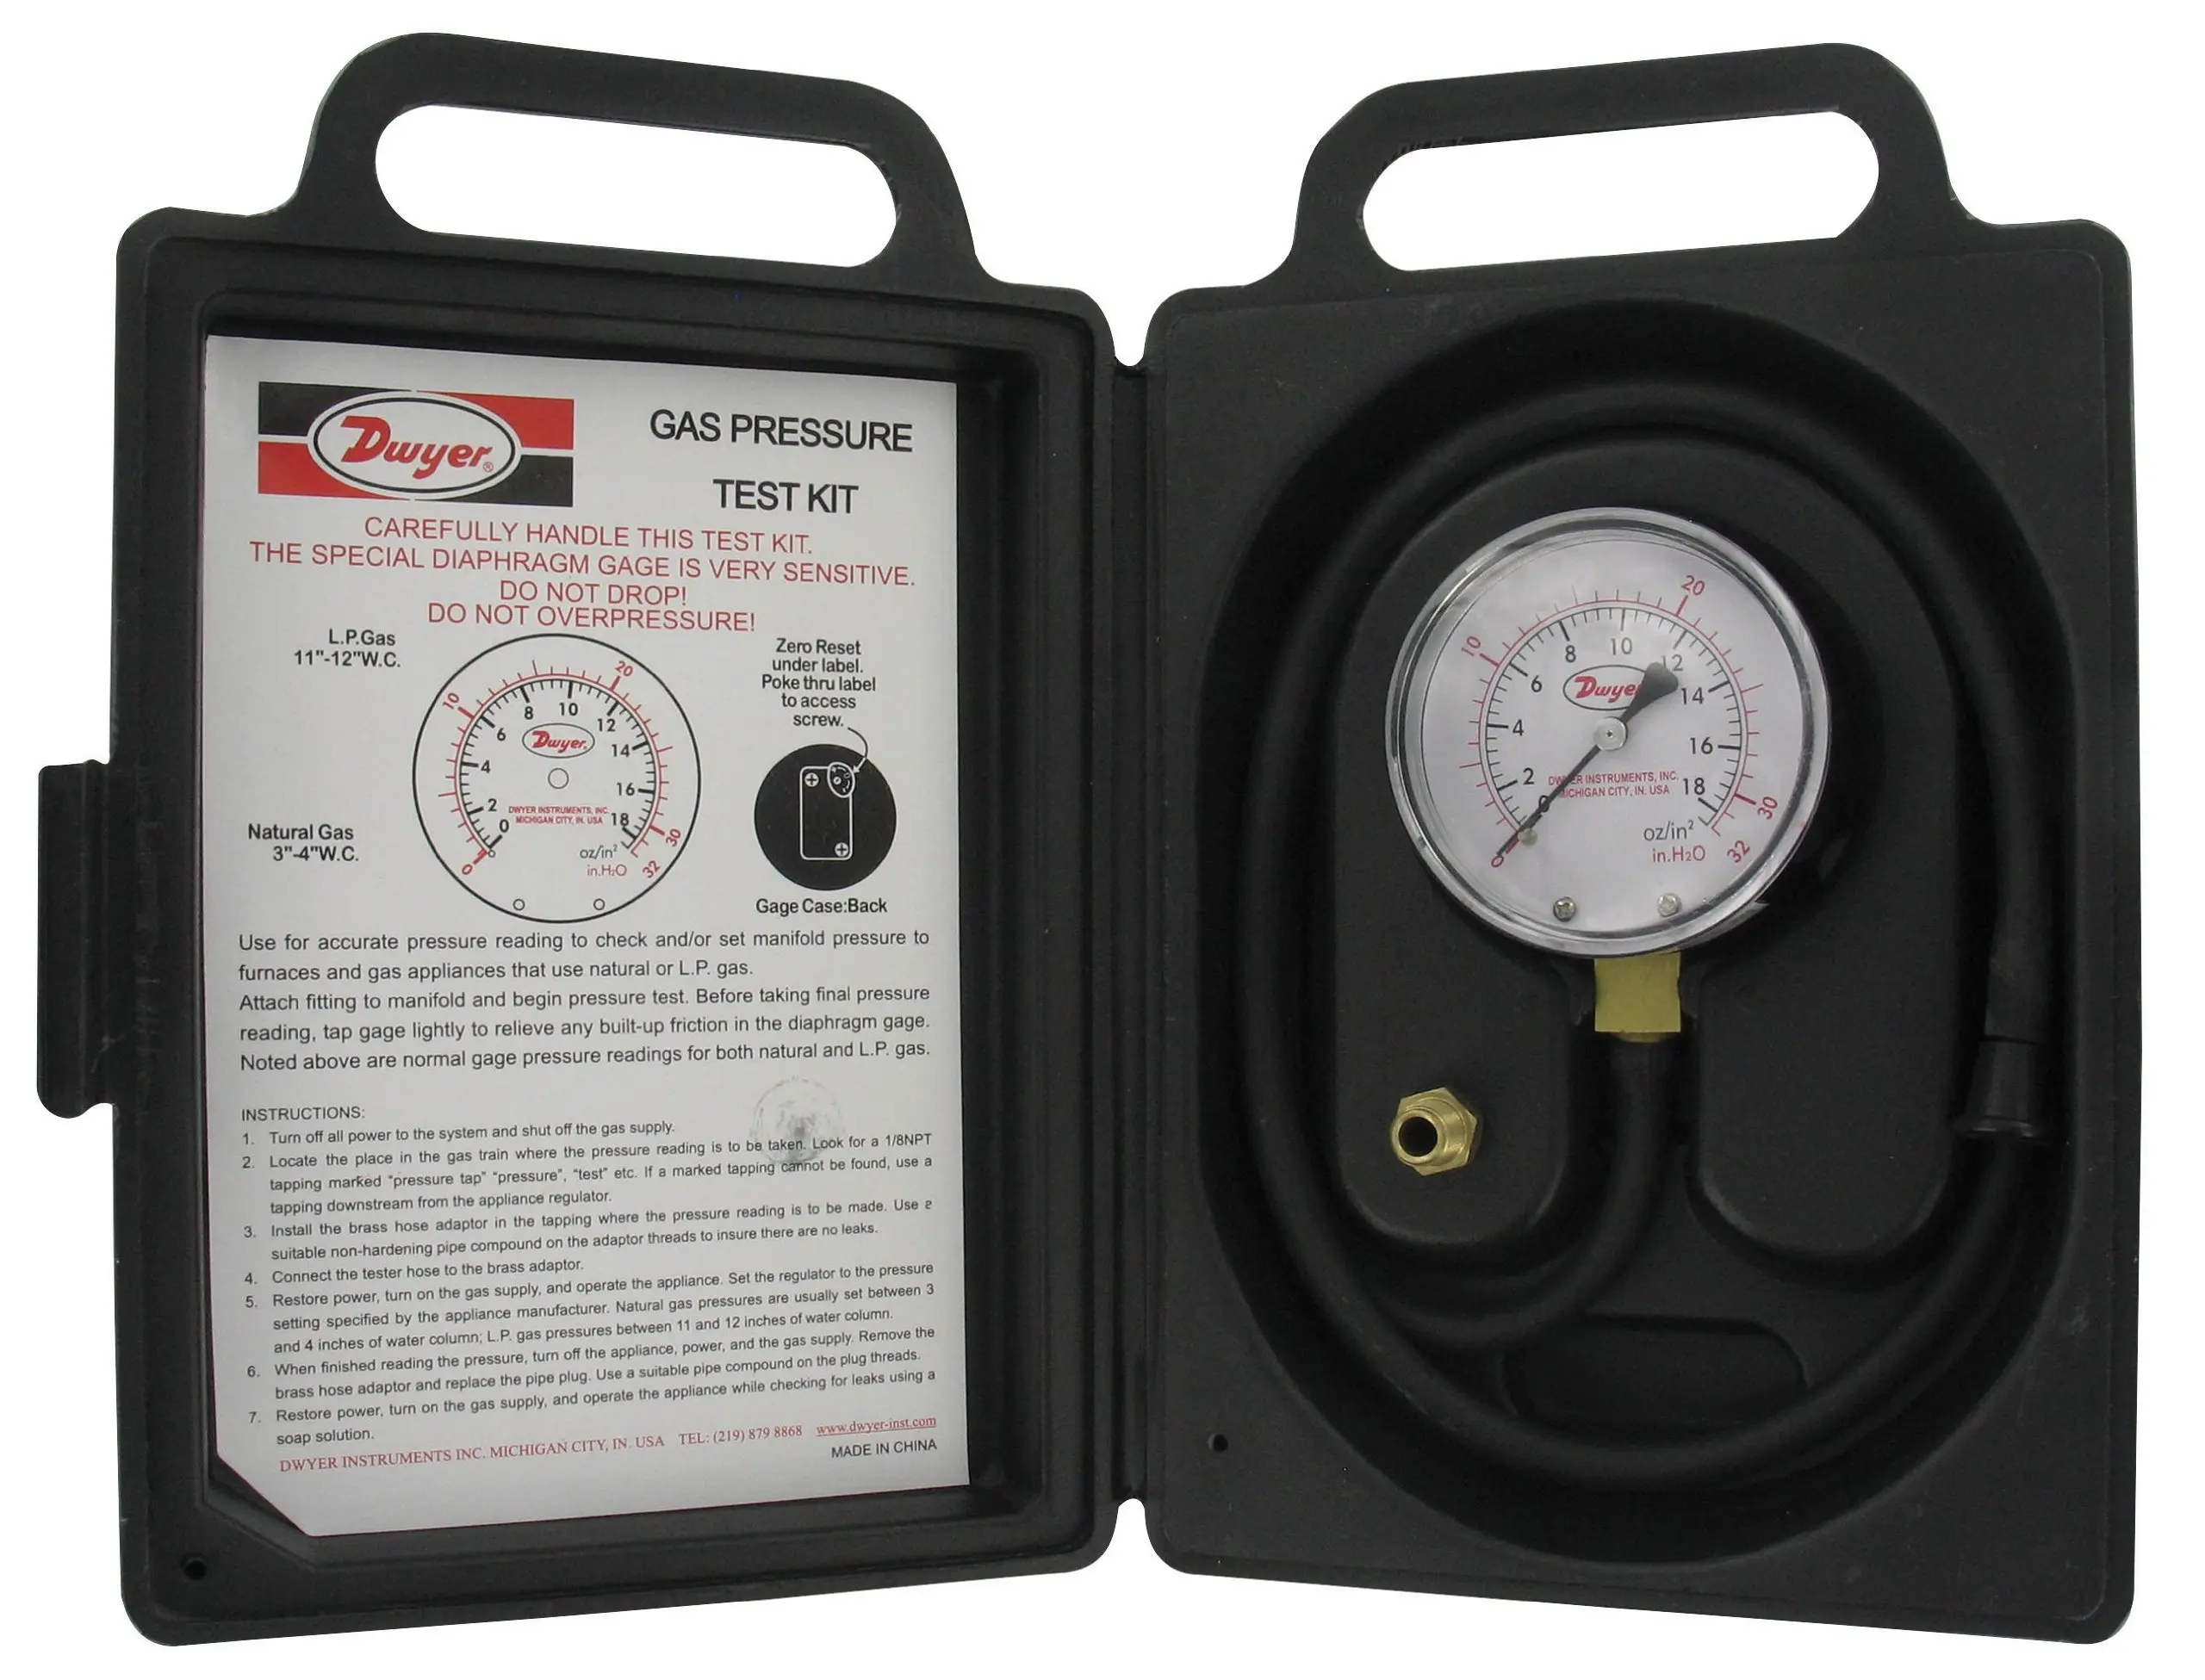 +//-1.5/% Accuracy 0 oz//sq in//WC-20 oz//sq in//WC Pressure Range NOSHOK 200 Series Dry Dial Indicating Low Pressure Diaphragm Gauge with Gas Pressure Test Kit 2-1//2 Dial